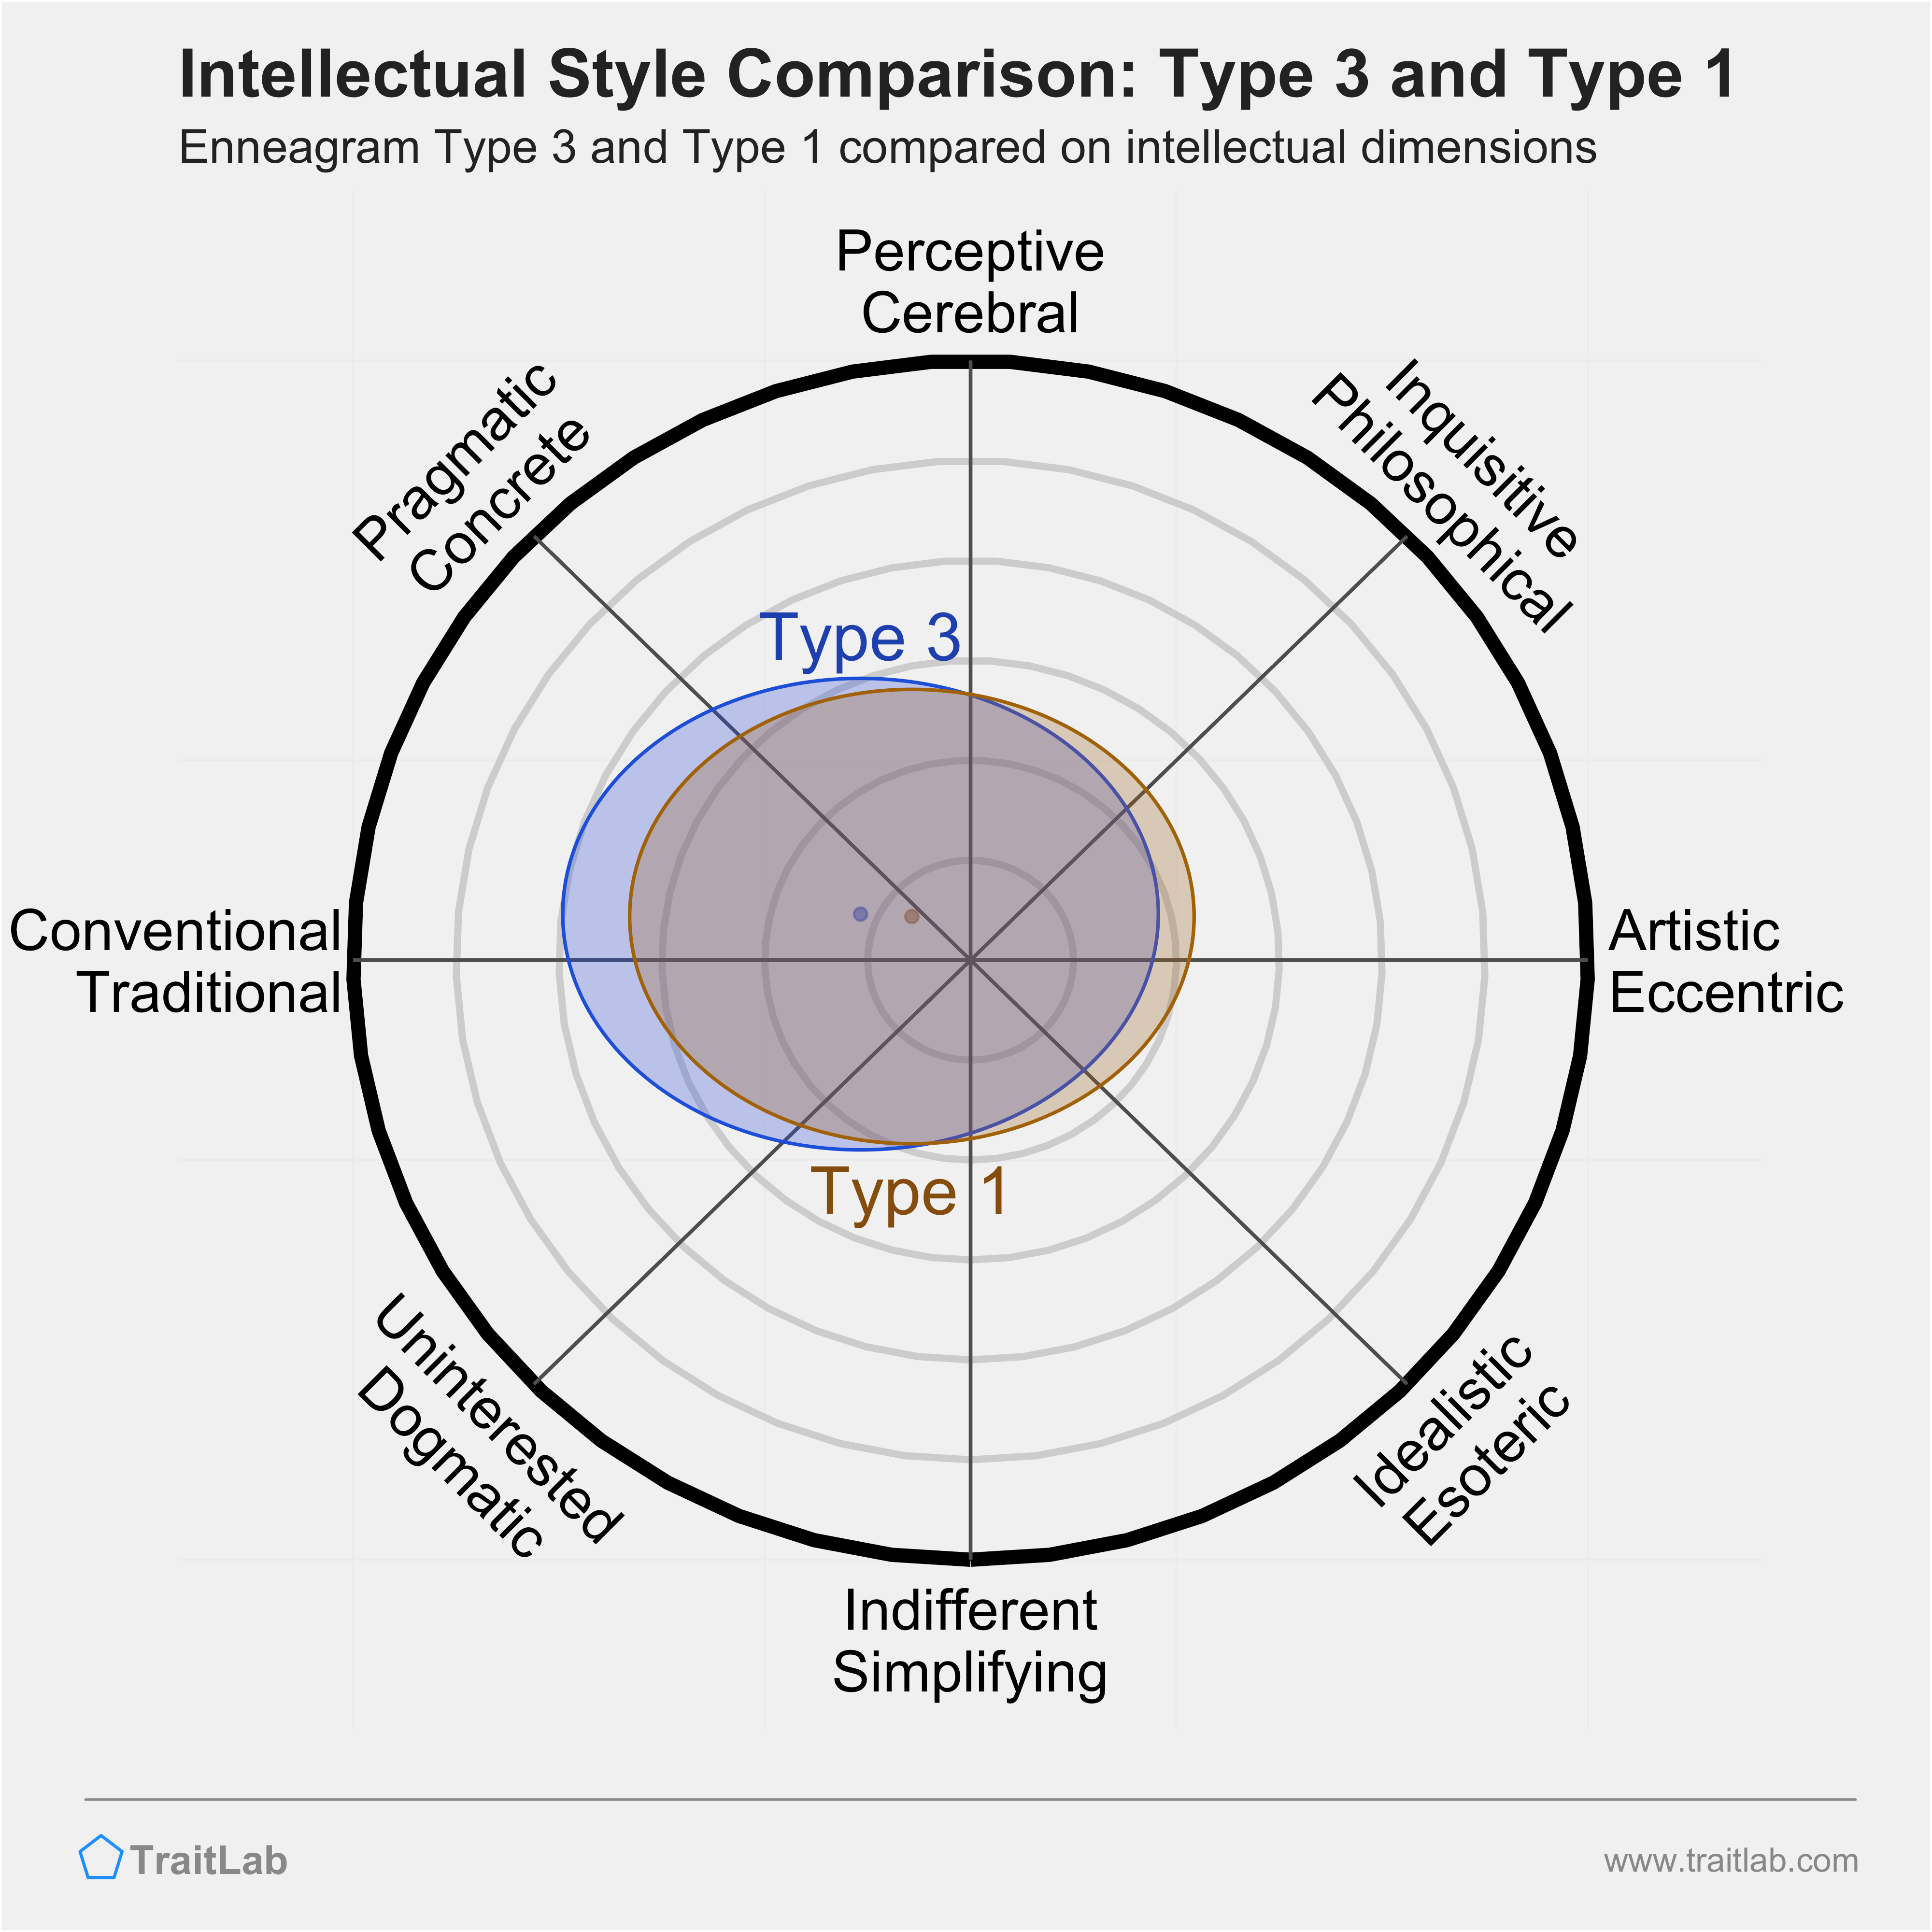 Type 3 and Type 1 comparison across intellectual dimensions